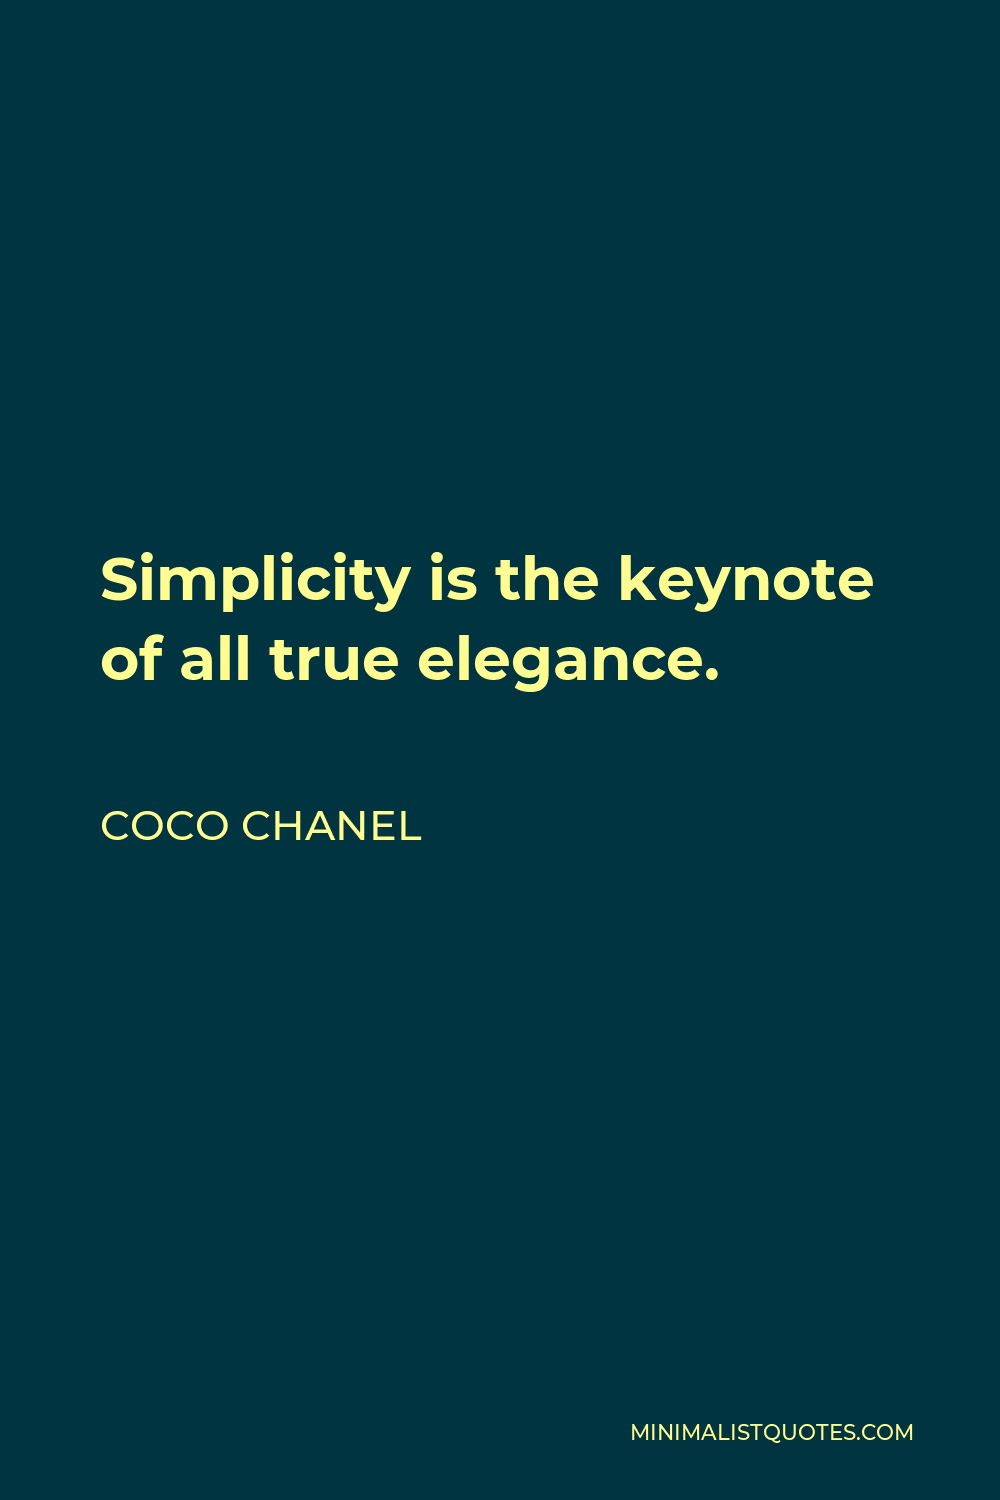 Coco Chanel Quote - Simplicity is the keynote of all true elegance.